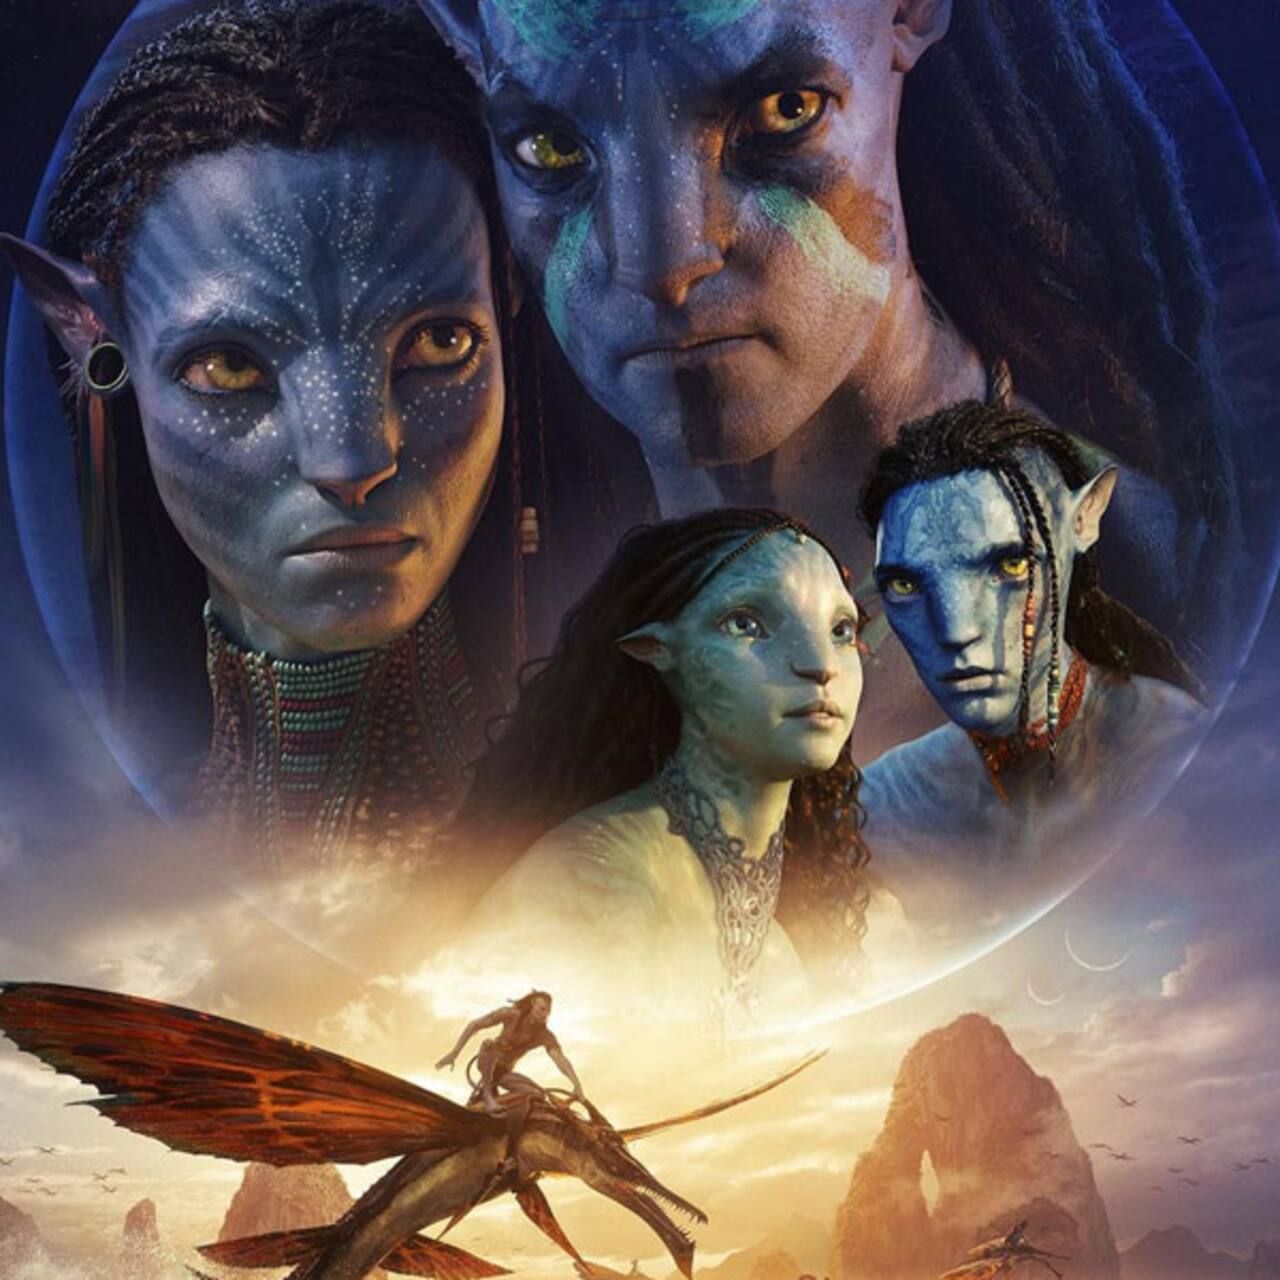 Avatar 2 The Way Of Water India Box Office: James Cameron film just falls short of Rs 150 crore mark after MASSIVE Monday drop